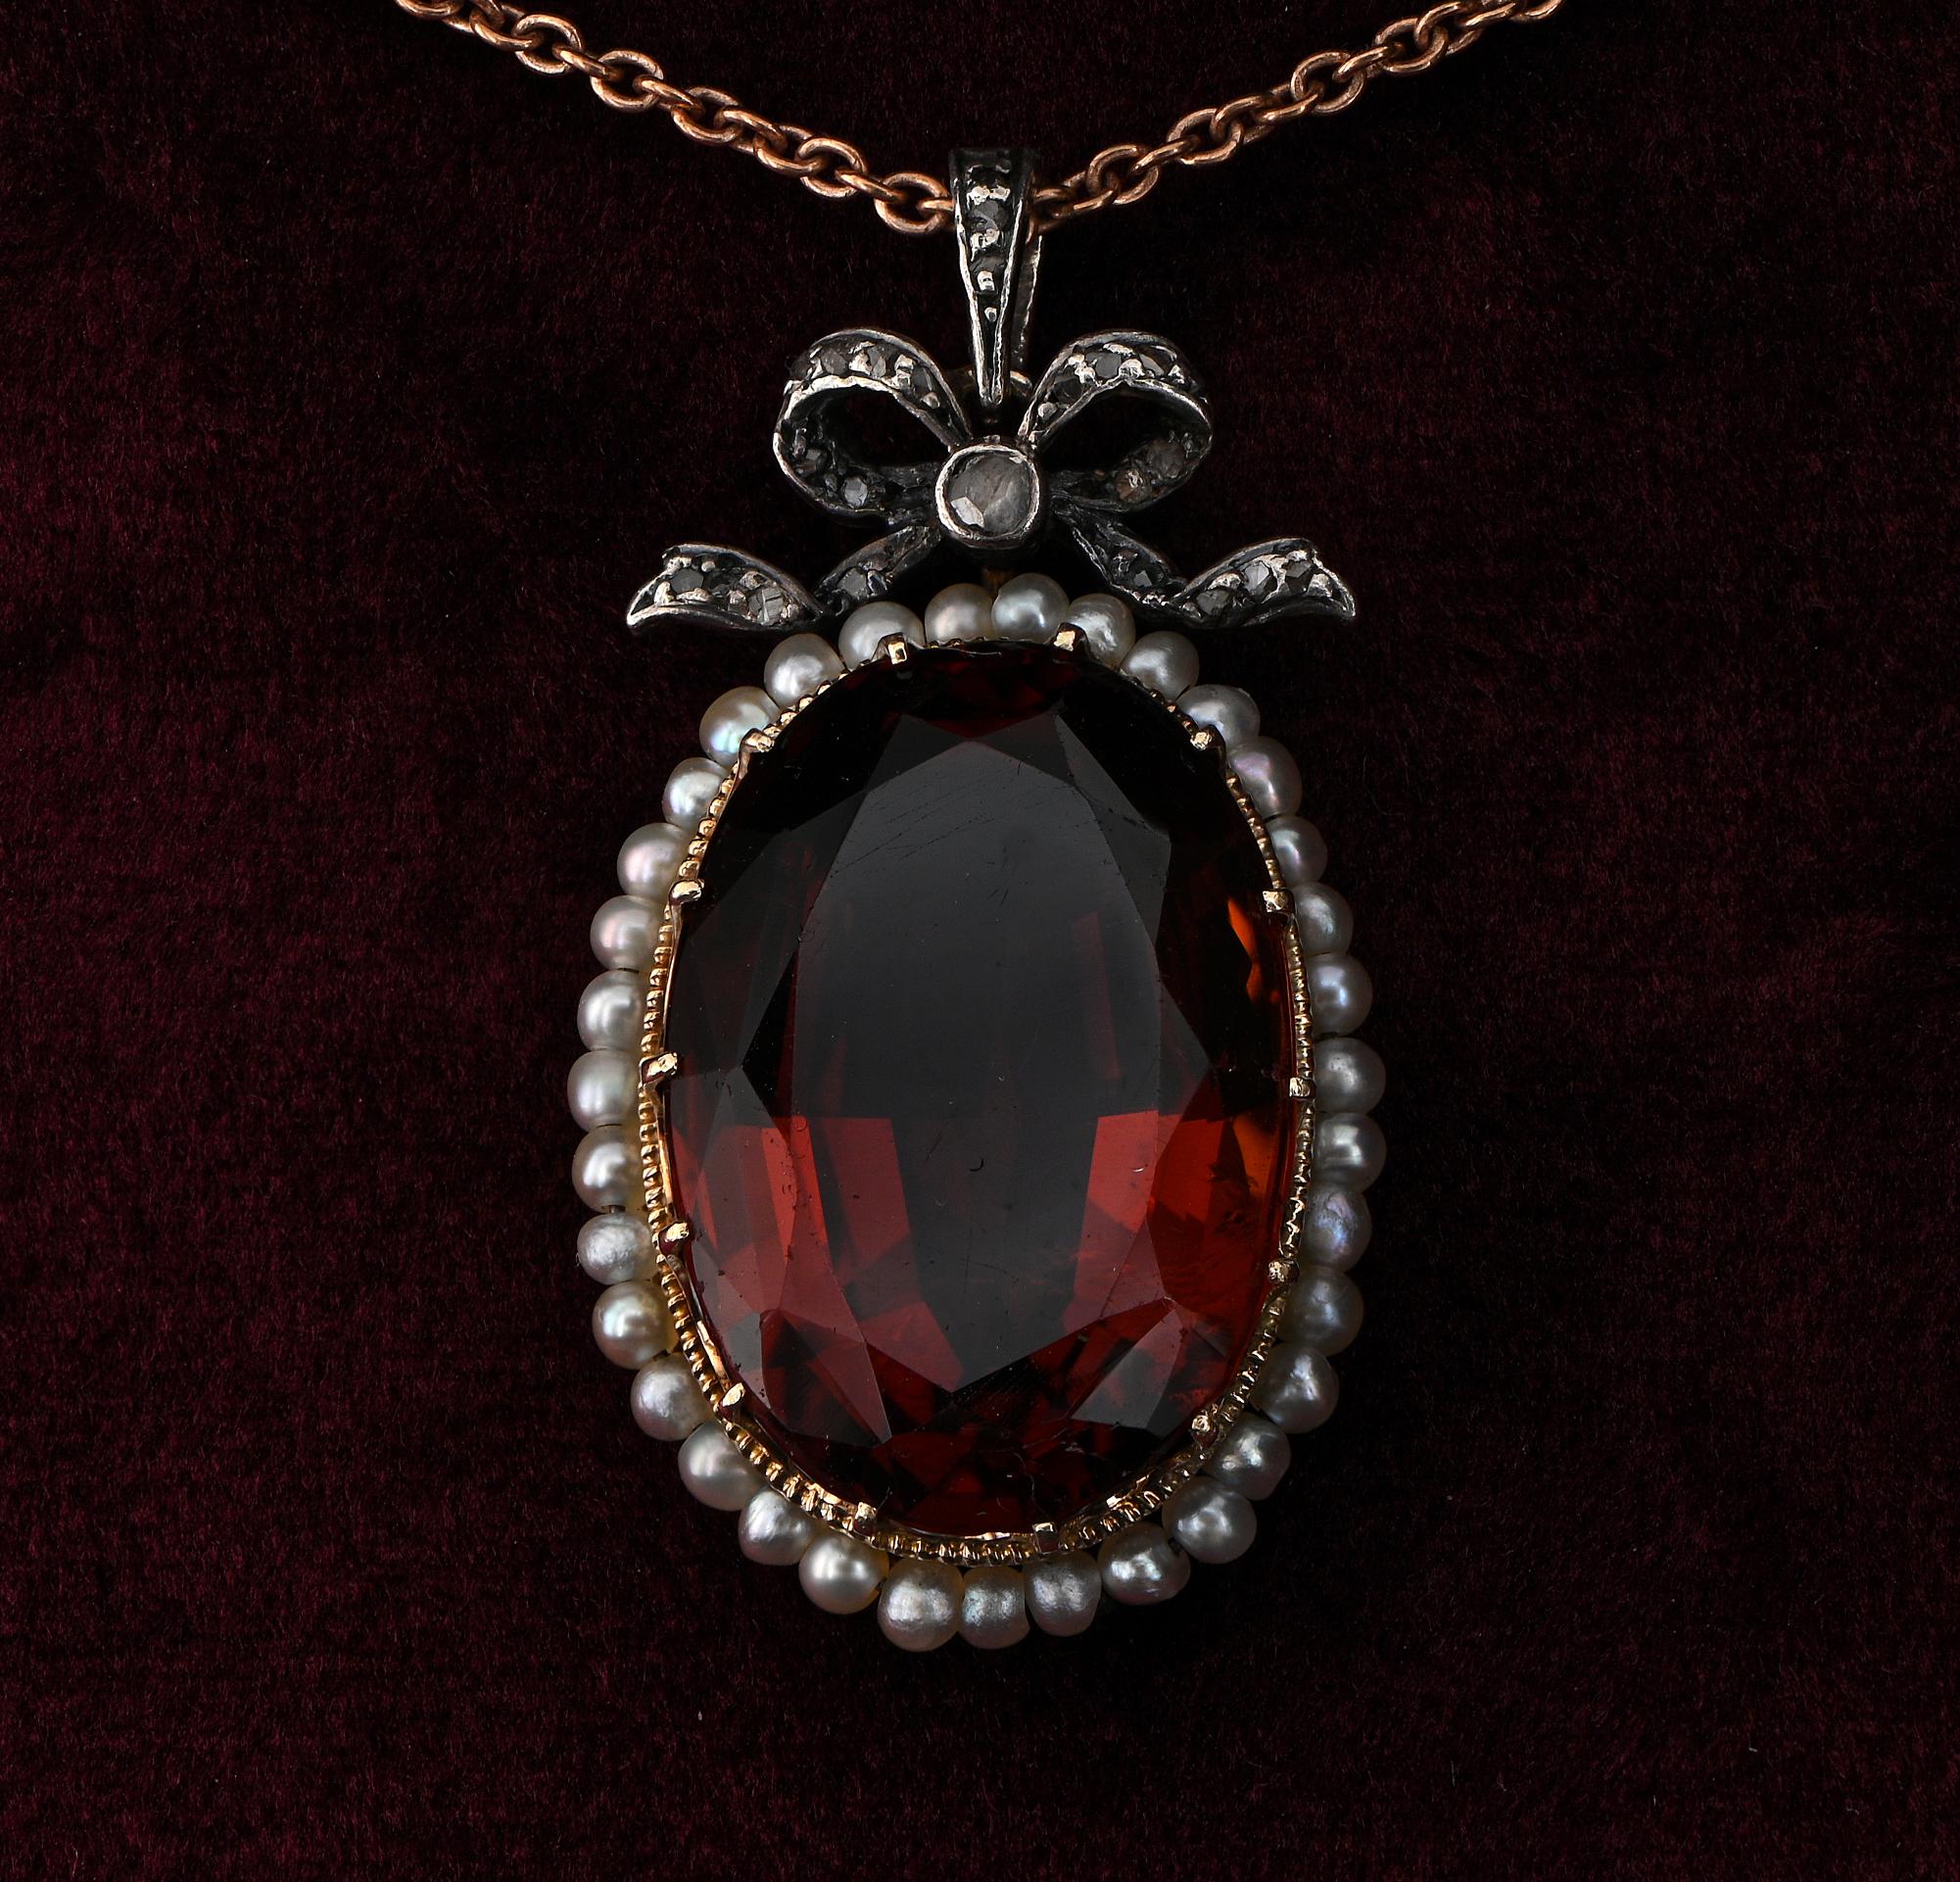 Rare Find
This authentic Victorian period pendant is 1880 ca.
Very pretty and distinctive from the period designed with a gorgeous bow topping the oval shape main pendant of fine gems selection and glorious crafting, 18 KT solid gold/ silver